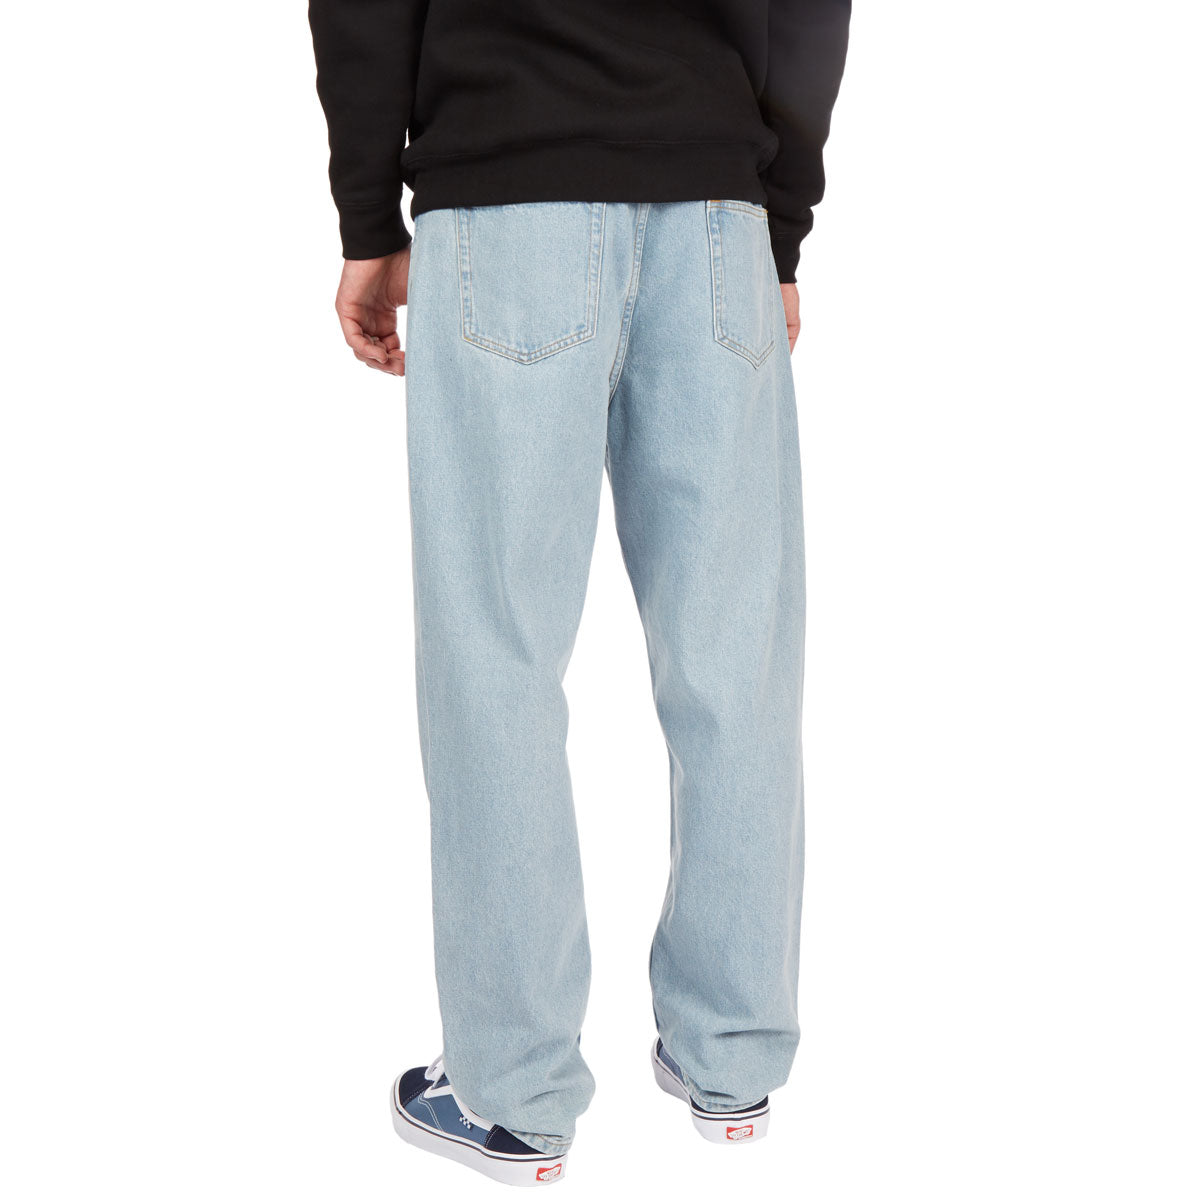 CCS Original Relaxed Taper Jeans - Light Wash image 3